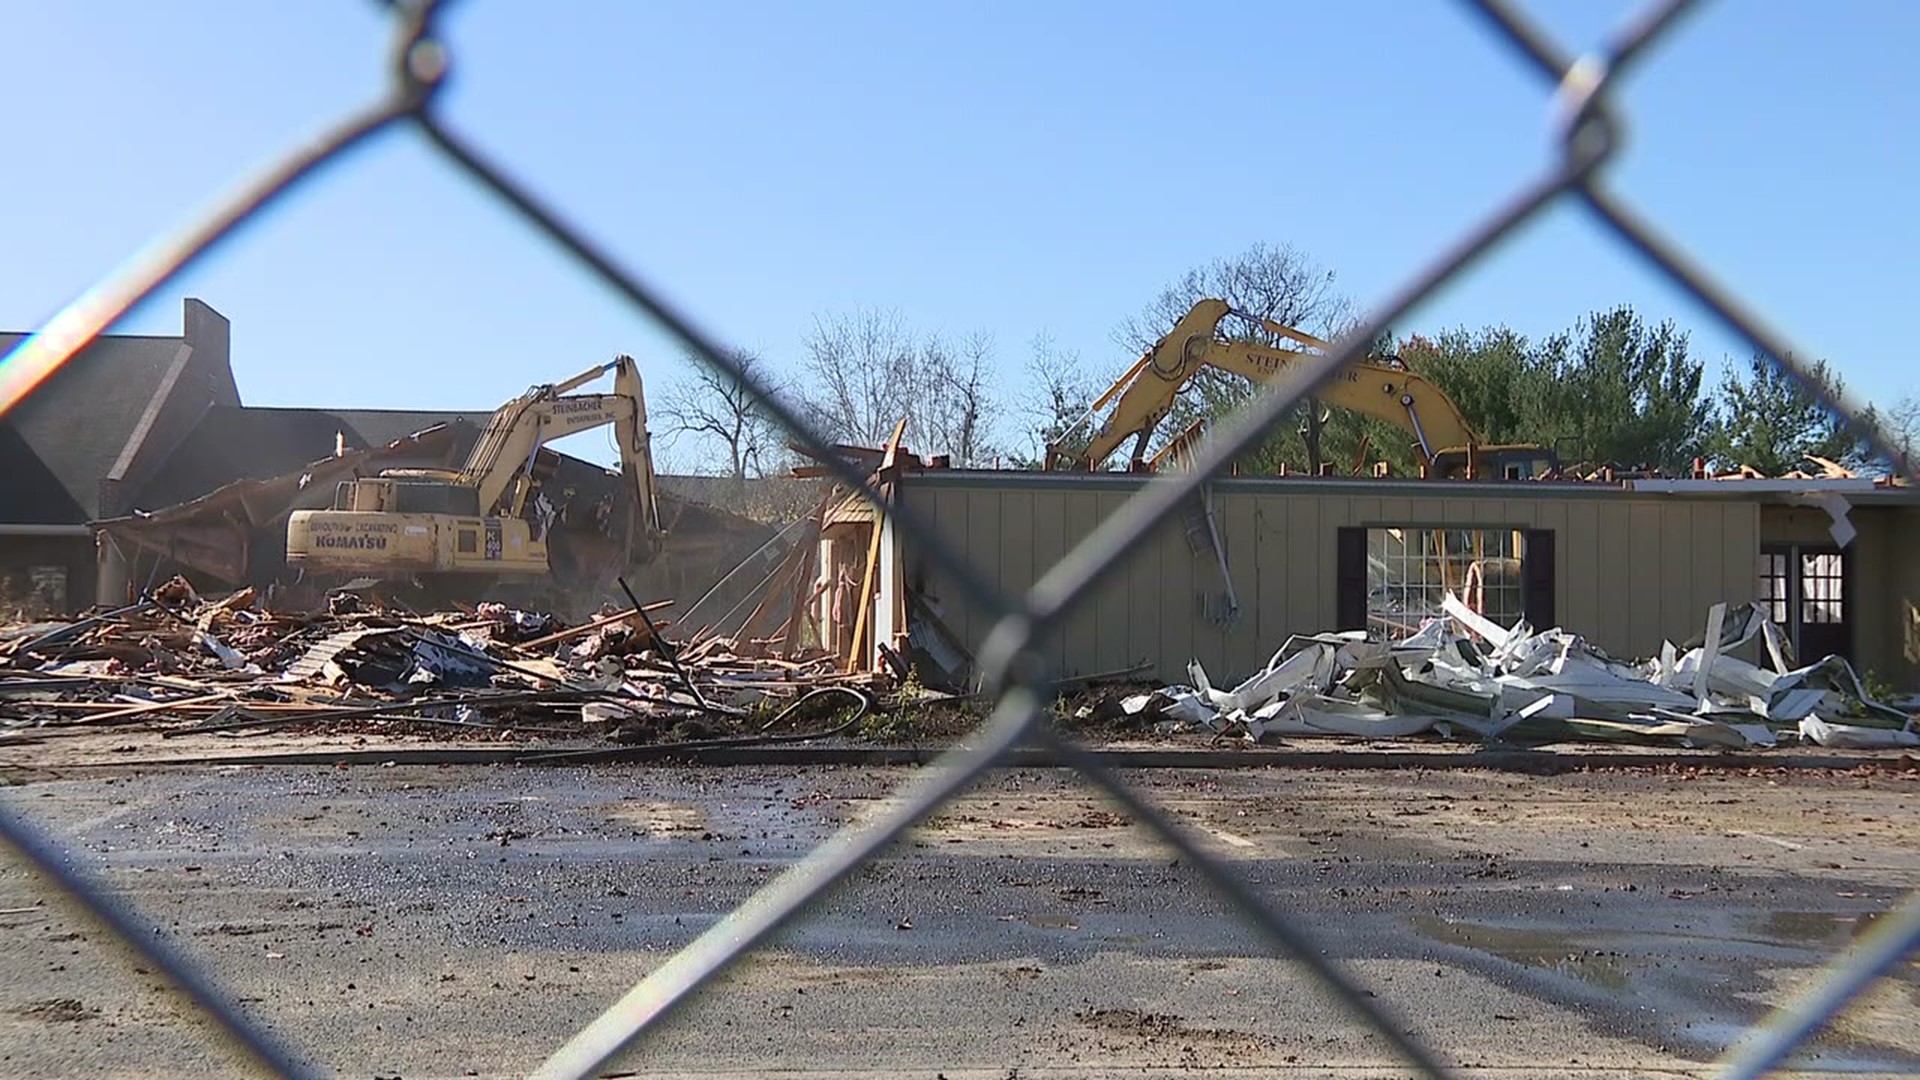 Some longtime customers stopped by the former eatery to watch the demolition process begin. Newswatch 16's Nikki Krize shows us the bittersweet scene.